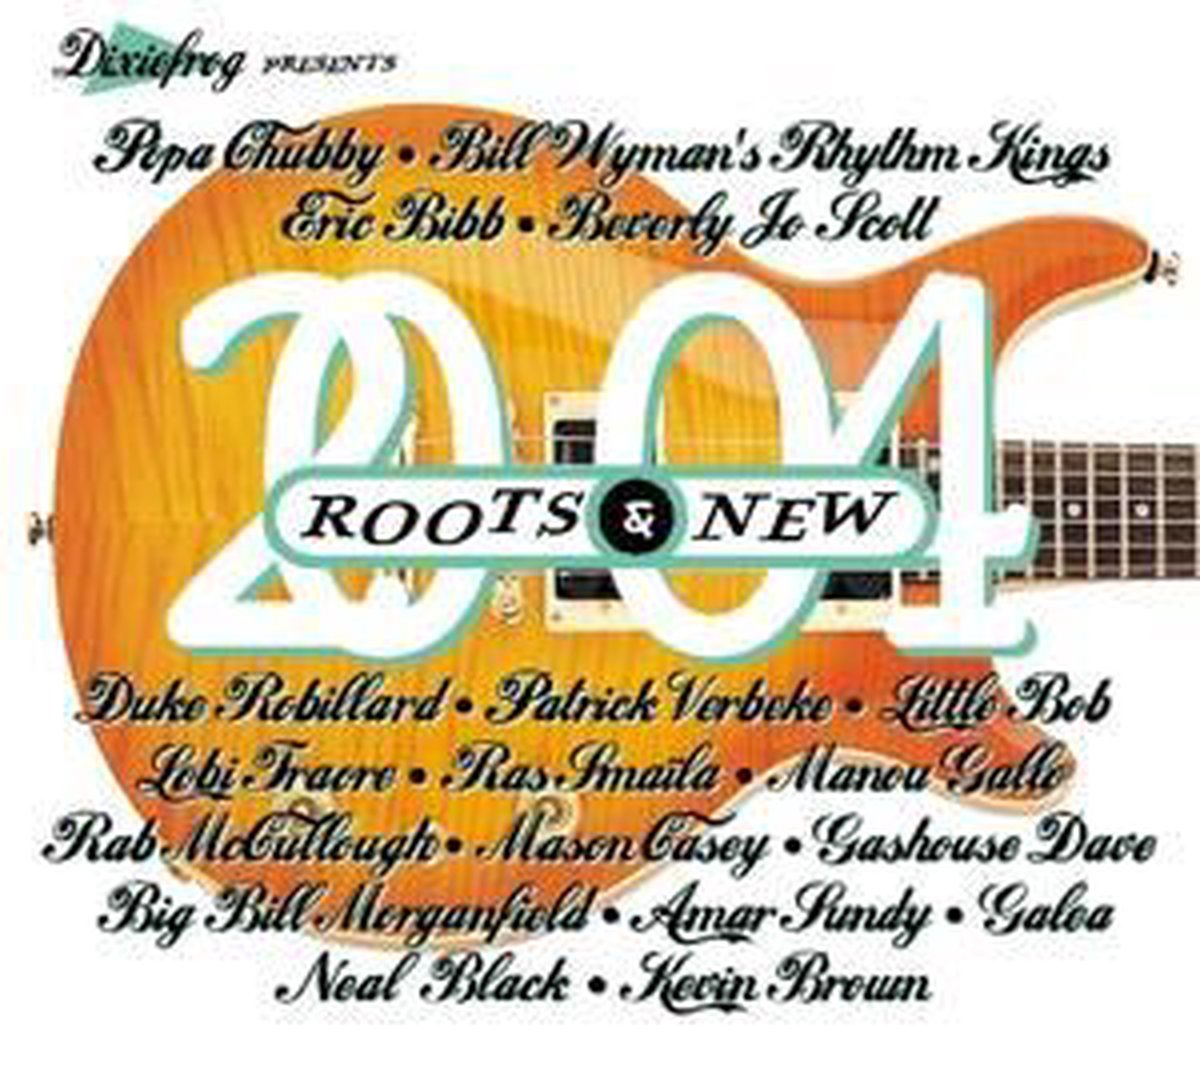 Roots & New 2004 Sampler - various artists